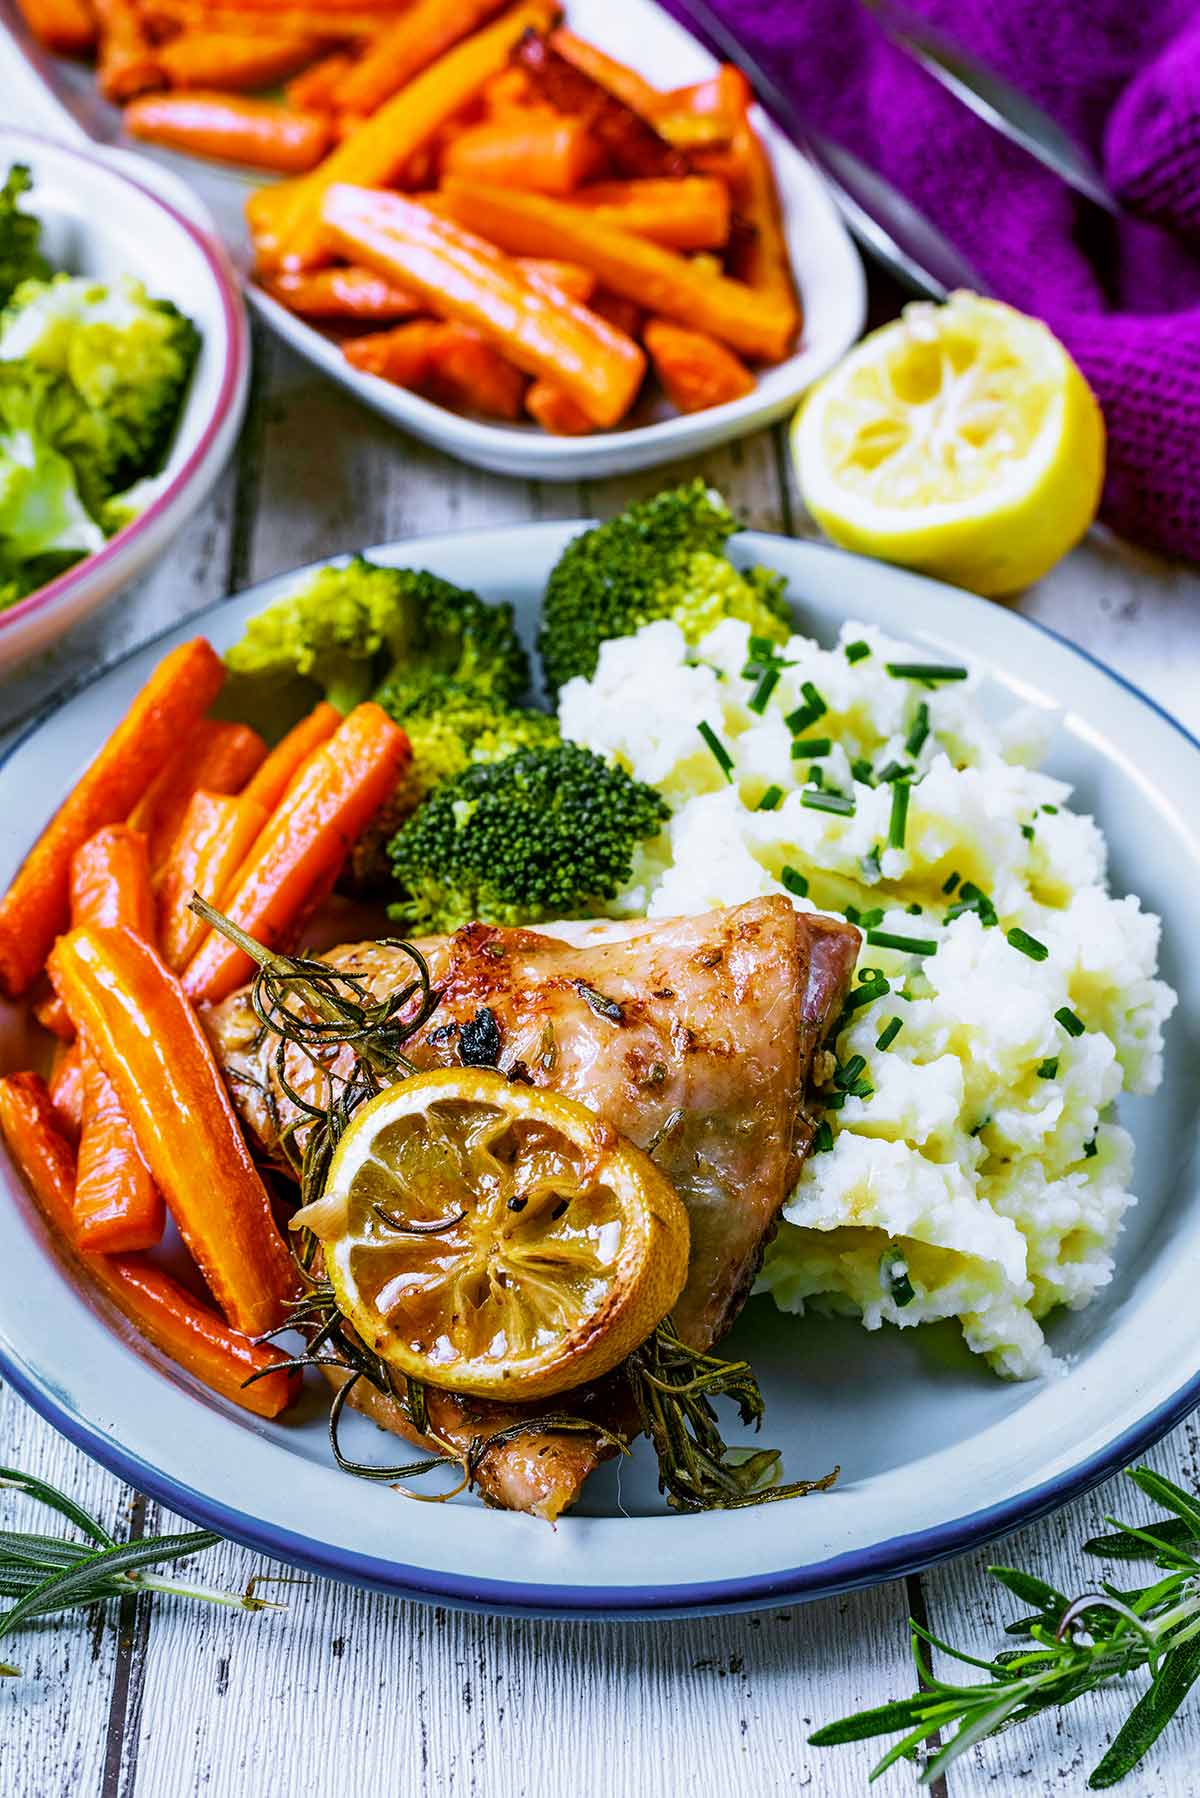 Chicken and vegetables on a white plate. A long dish of carrots is in the background.